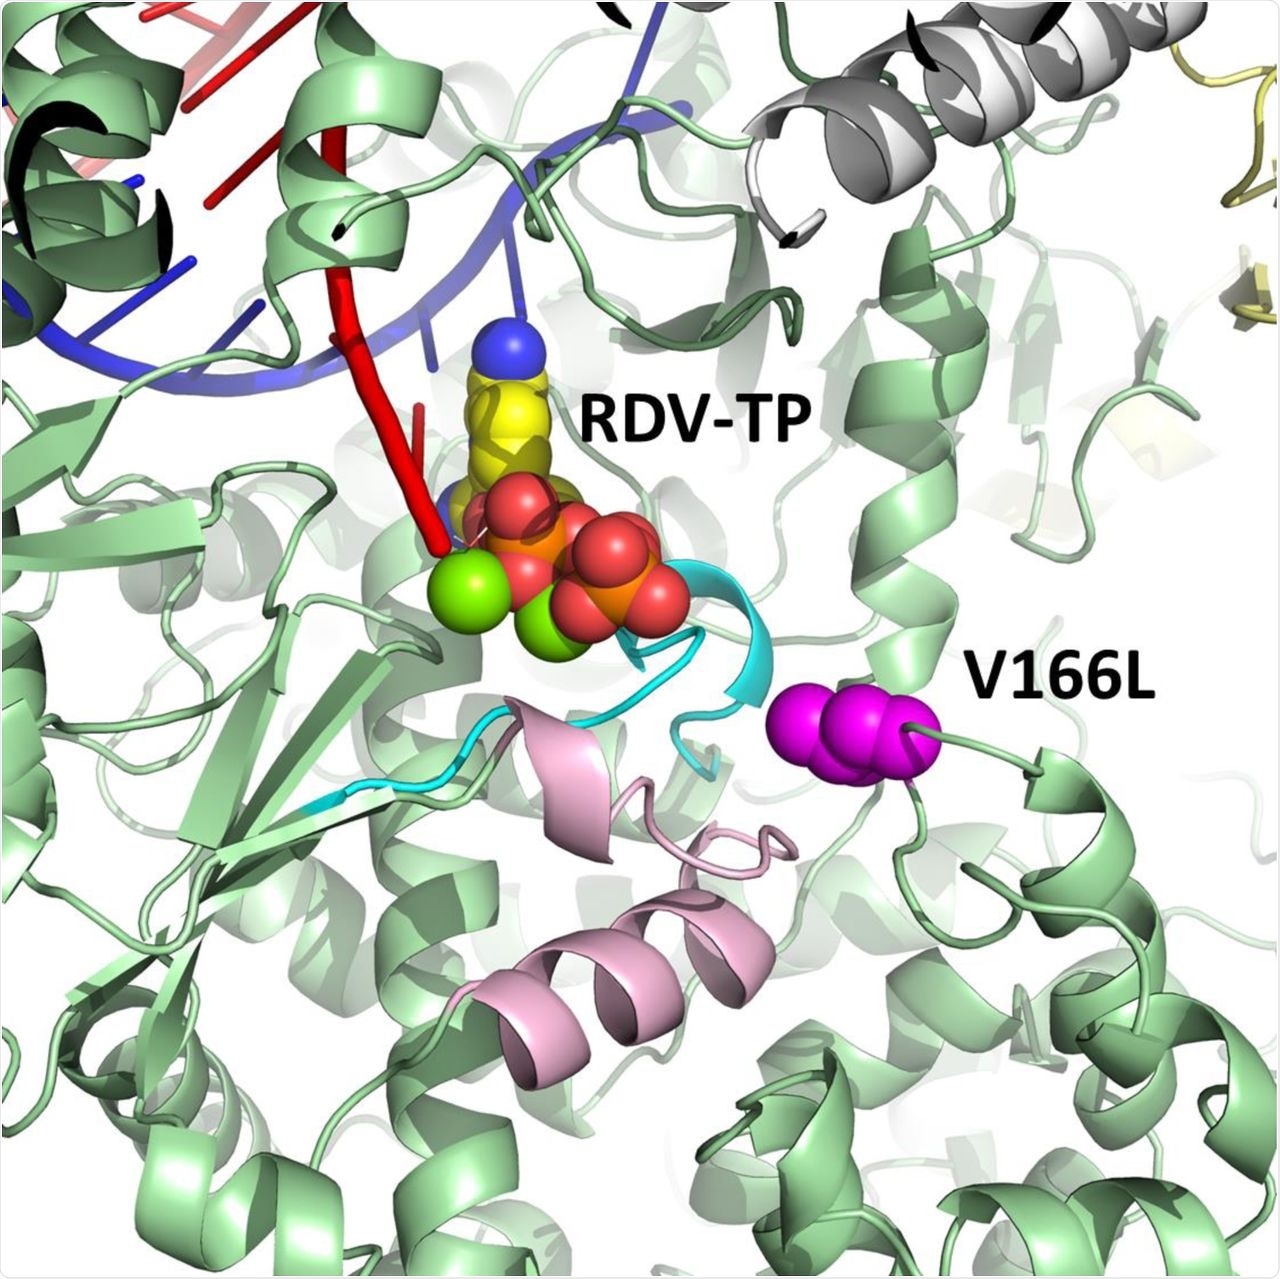 Model of pre-incorporated remdesivir triphosphate (RDV-TP) with a V166L substitution (magenta) in SARS-CoV-2 nsp12 (green).